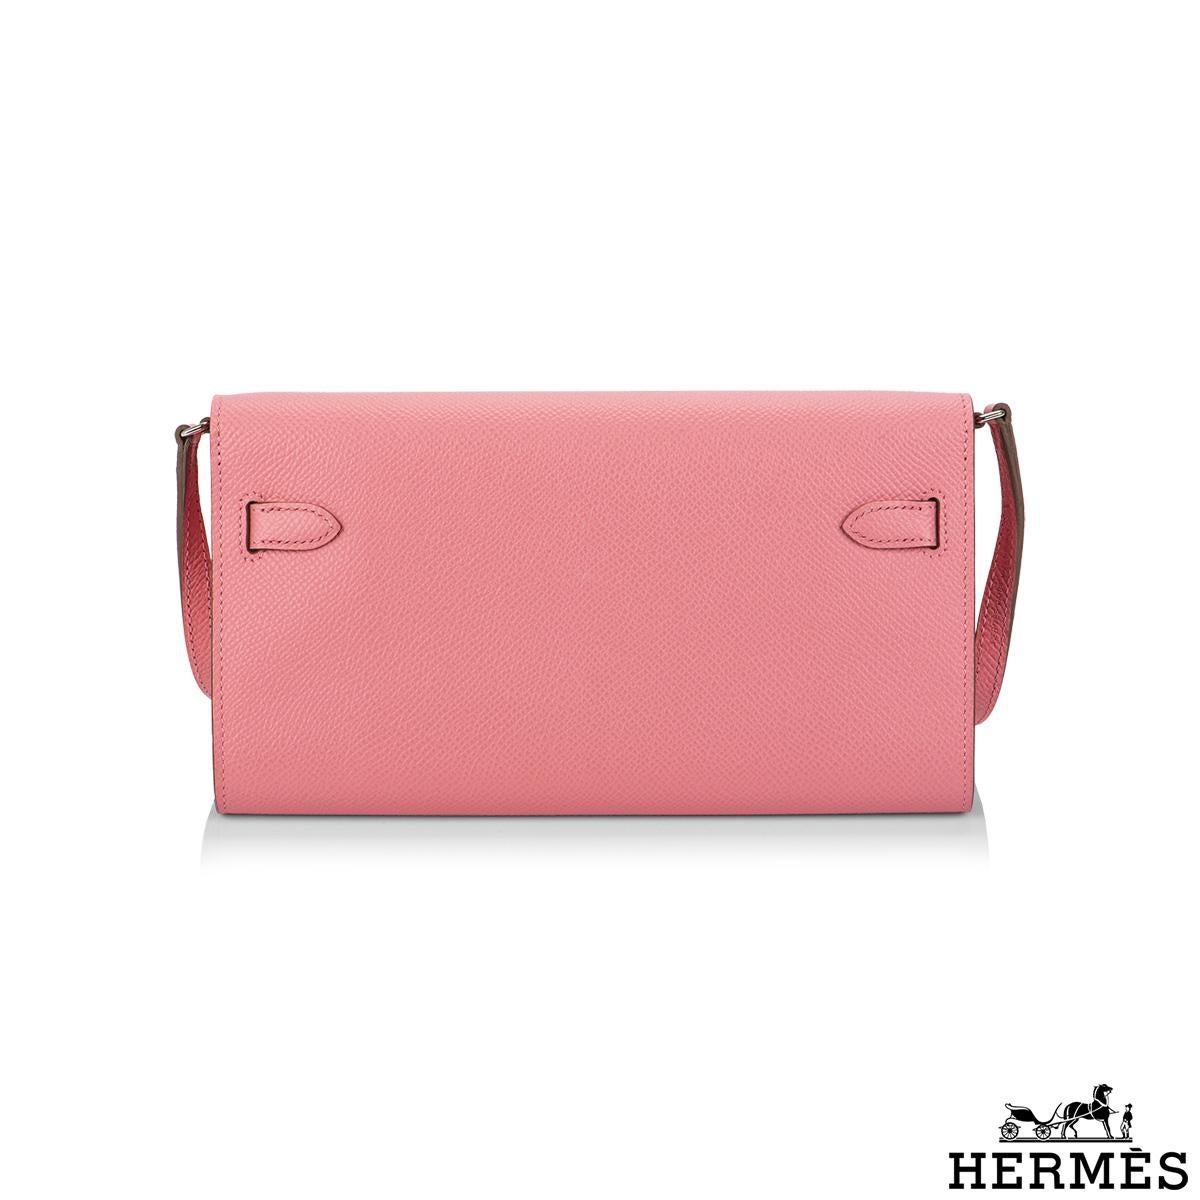 A Chic And Exquisite Hermès Kelly Wallet To Go. The exterior of this Kelly features rose confetti epsom leather with palladium hardware and has tonal stitching, two straps with front toggle closure and removable crossbody strap.

The interior is